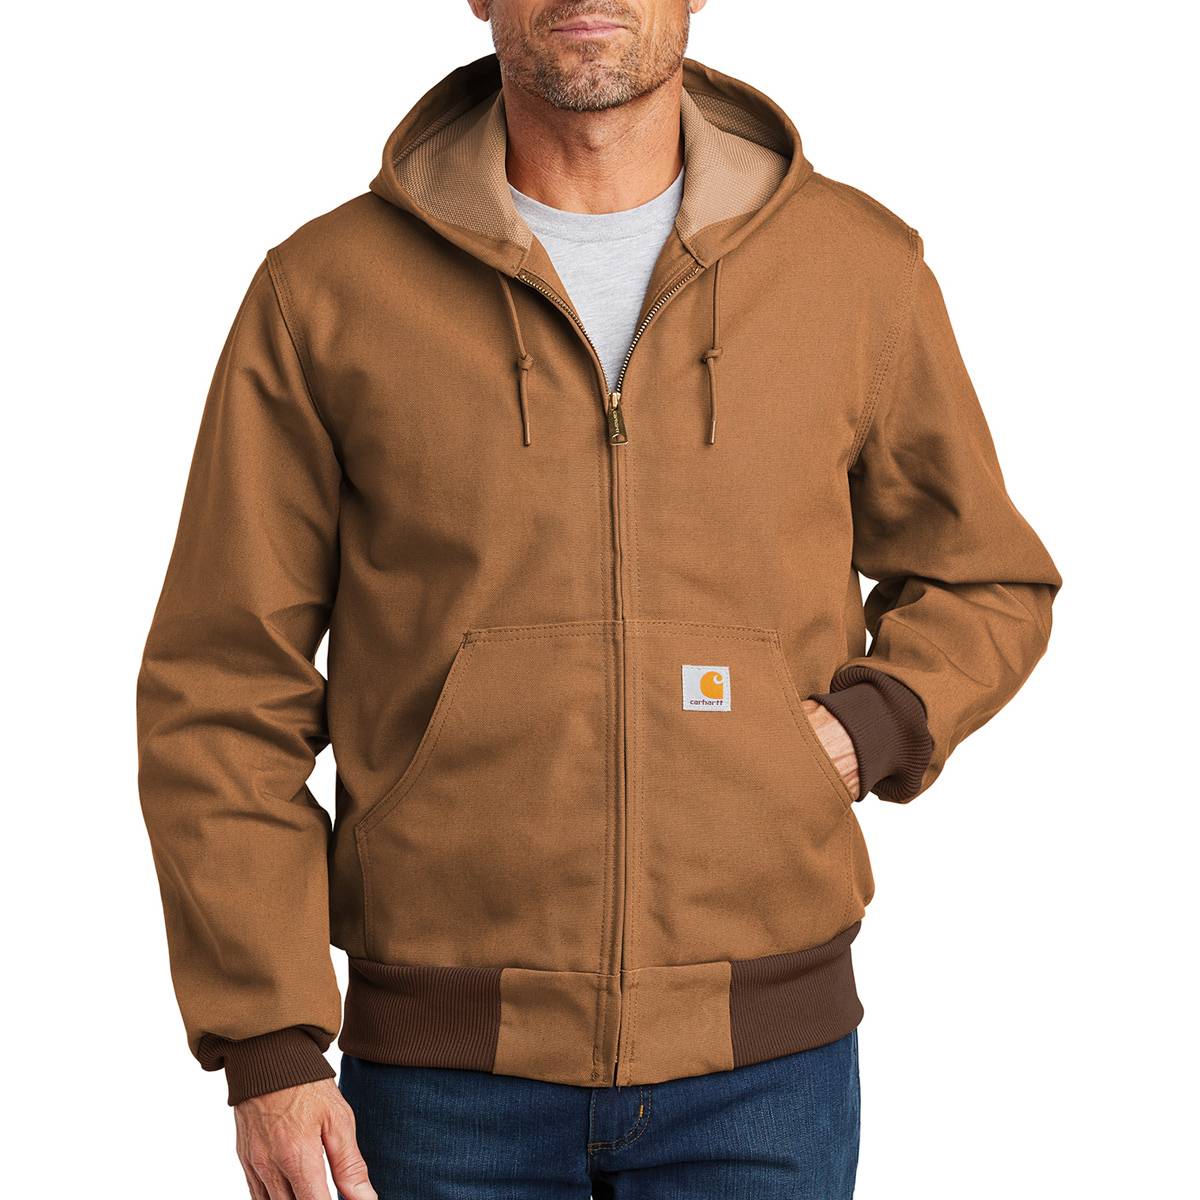 Apparel & Accessories :: Jackets & Vests :: Carhartt Thermal-Lined Duck ...